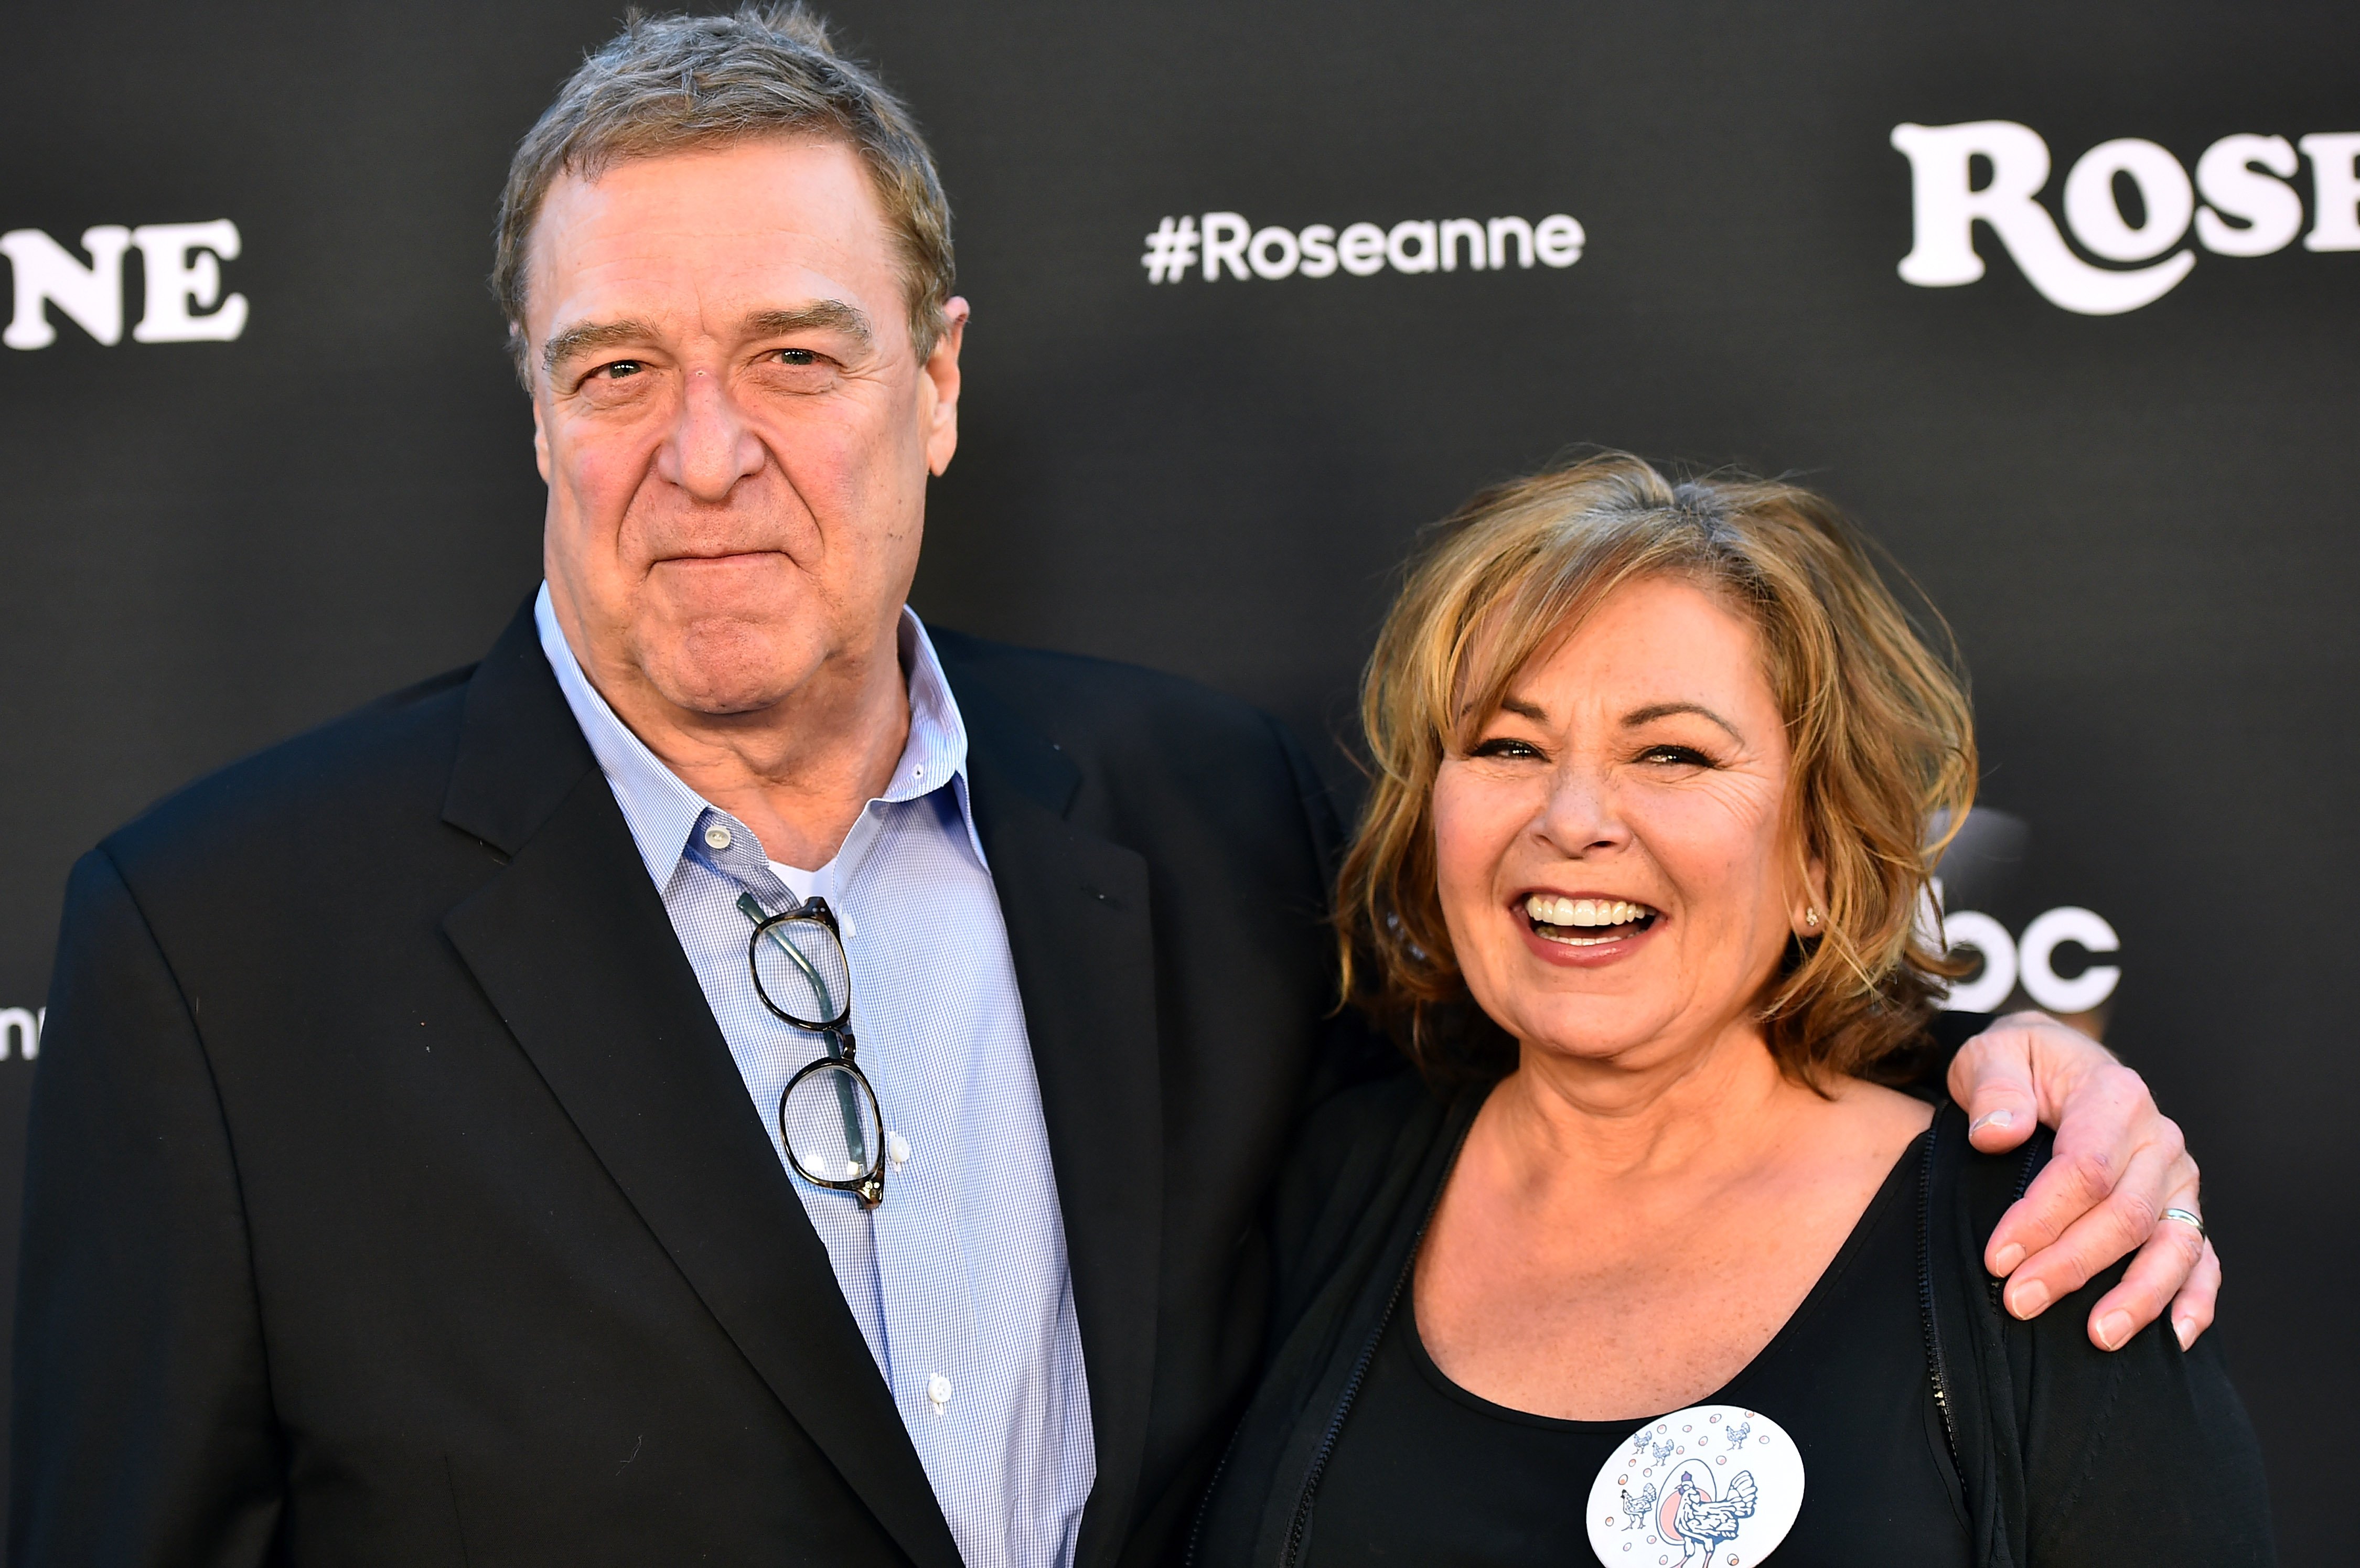 John Goodman and Roseanne Barr attend the premiere of "Roseanne" in Burbank, California on March 23, 2018 | Photo: Getty Images